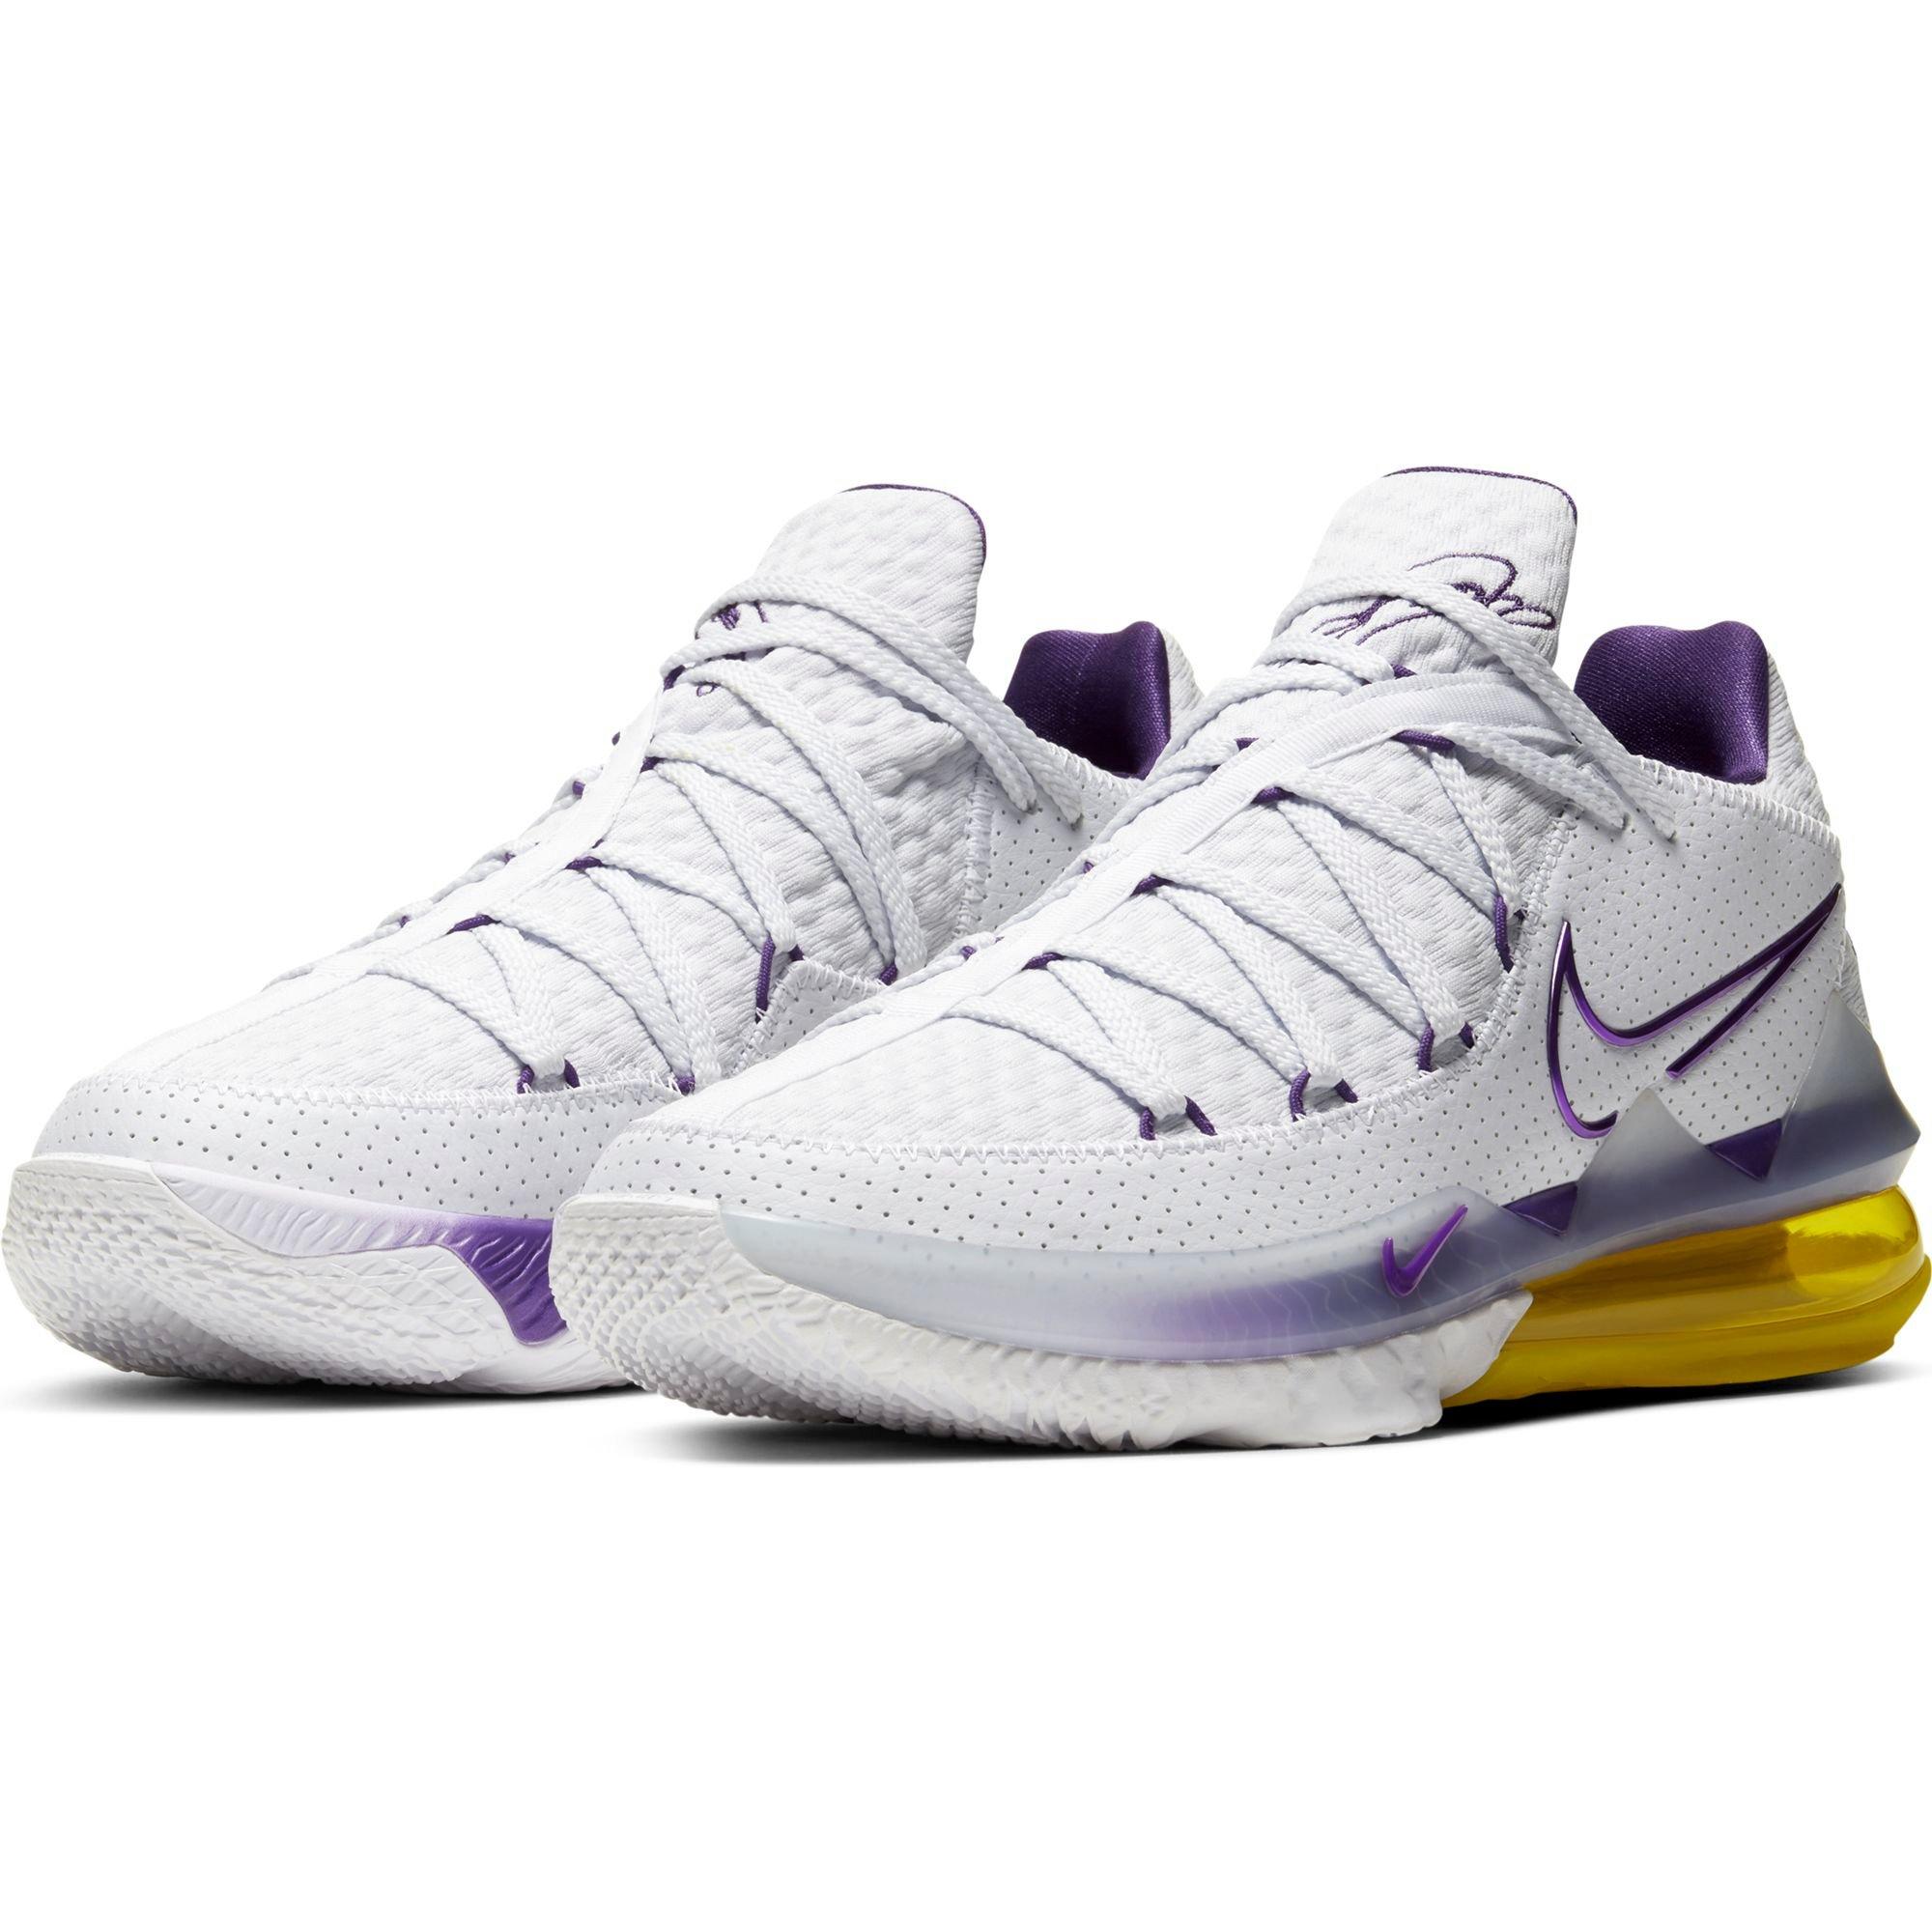 purple and white lebrons